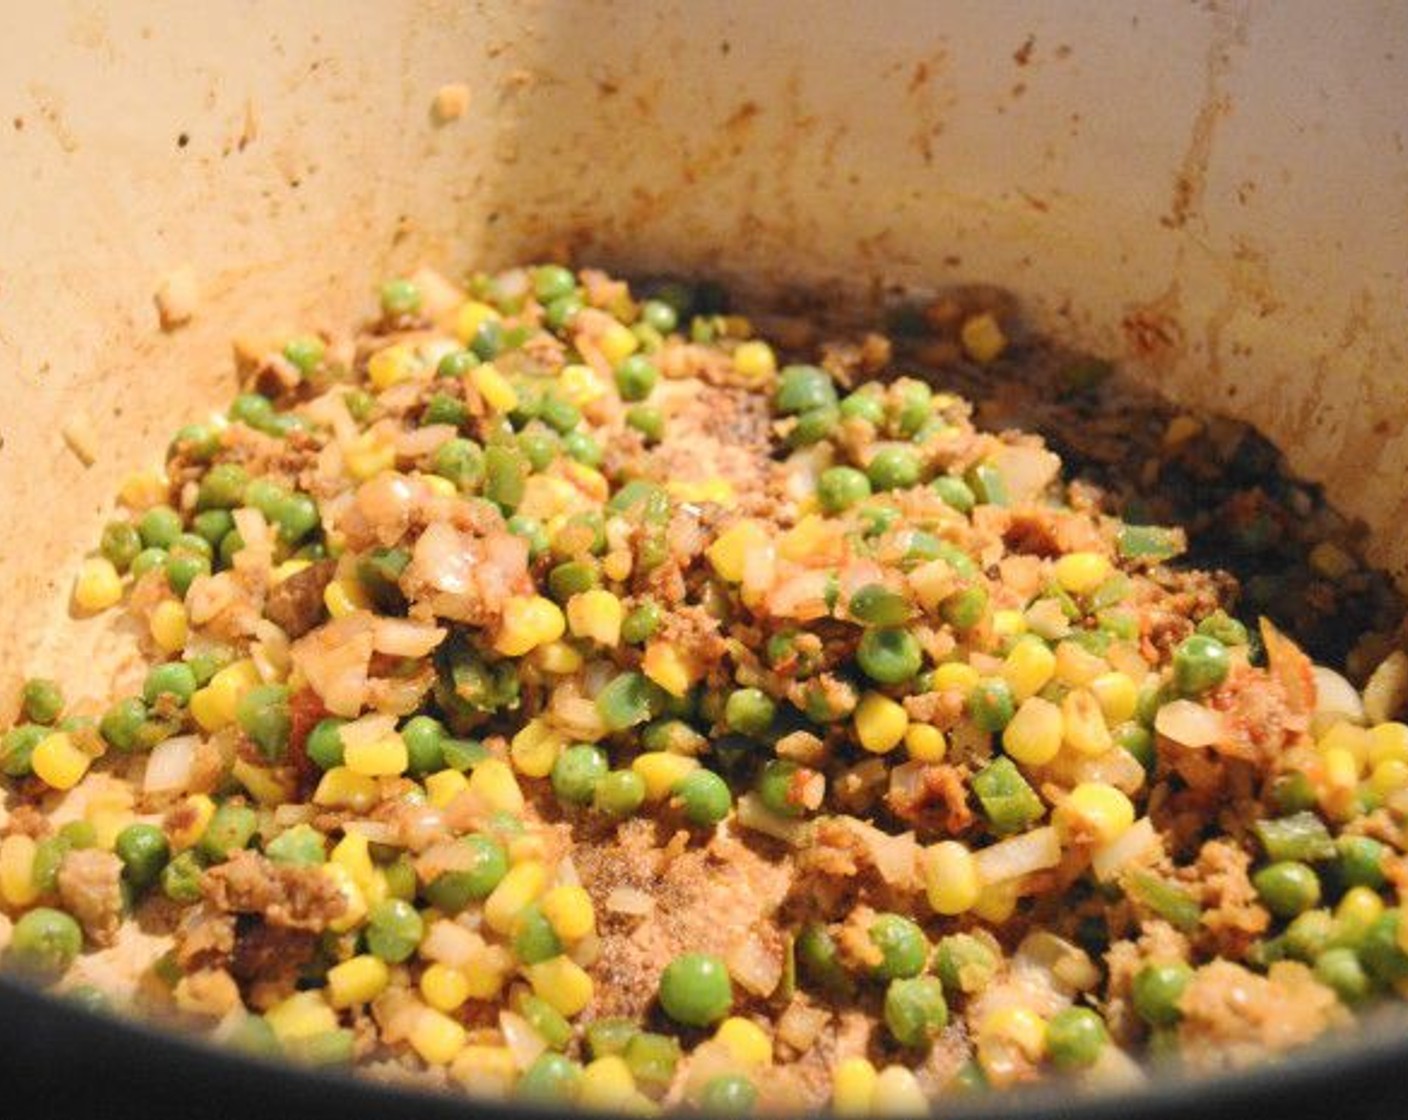 step 4 Add the Onion (1), Jalapeño Peppers (2), Frozen Corn Kernels (1/2 cup), and Frozen Green Peas (1/2 cup) into the pot and let them get soft and fragrant for a minute.